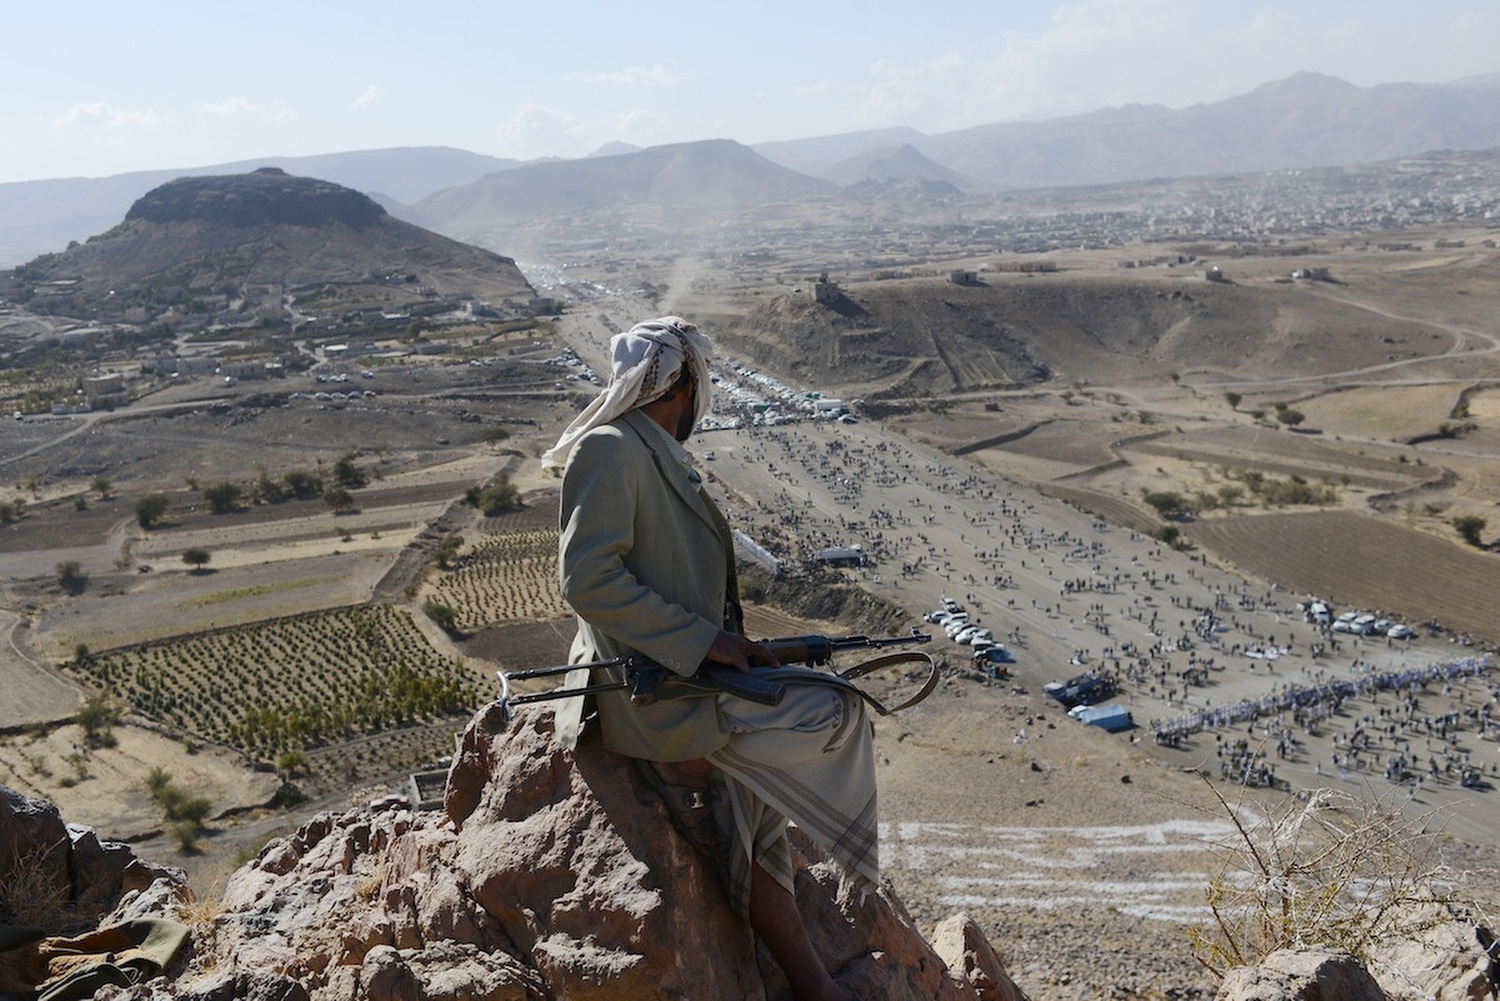 A Yemeni tribesman keeps watch from the top of a mountain during a Houthi gathering for Mawlid al Naby, the birthday of the Prophet Mohammad. Thousands of men and women came from around northern Yemen to hear the leader, Abdul Malik al Houthi, address the crowd on politics, religion, and the West. 